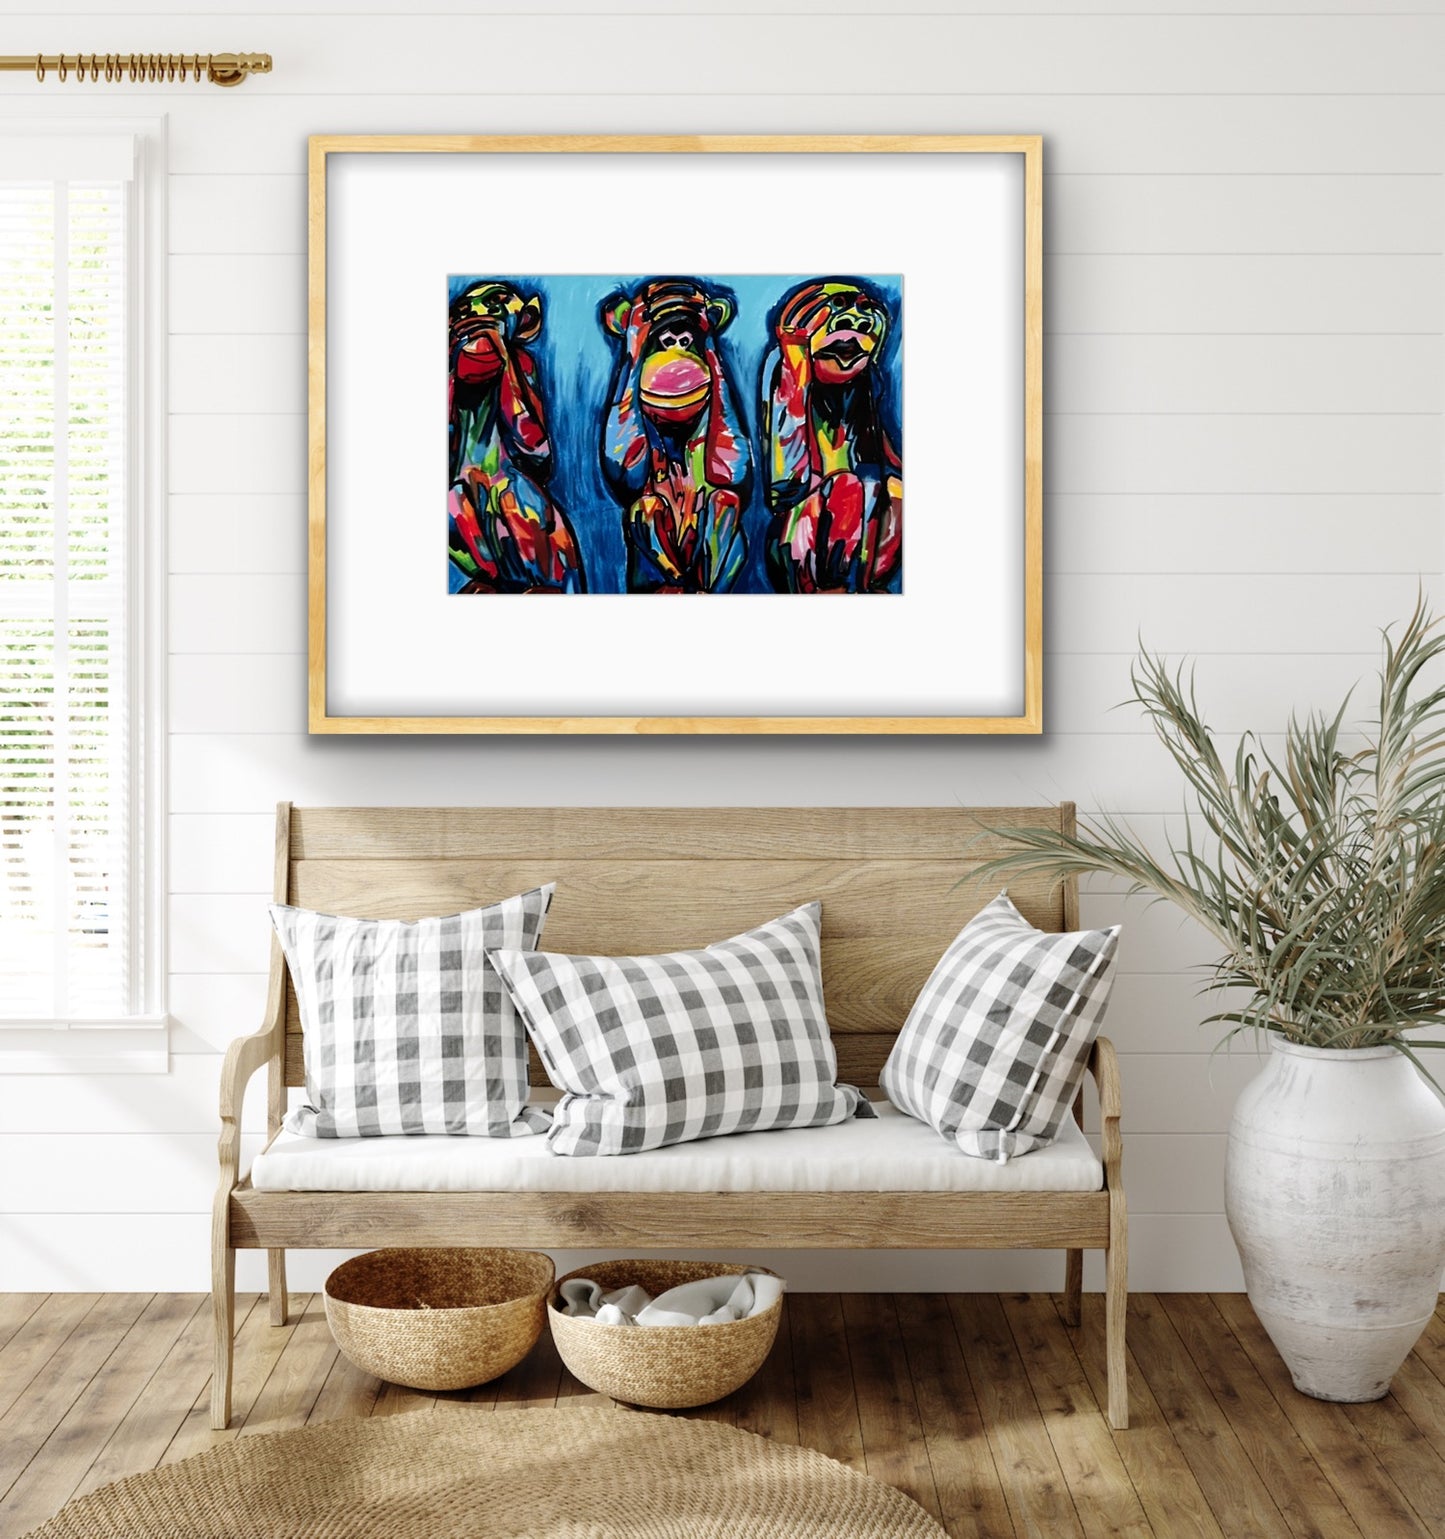 Wise Monkeys - fine prints and canvas prints in more size